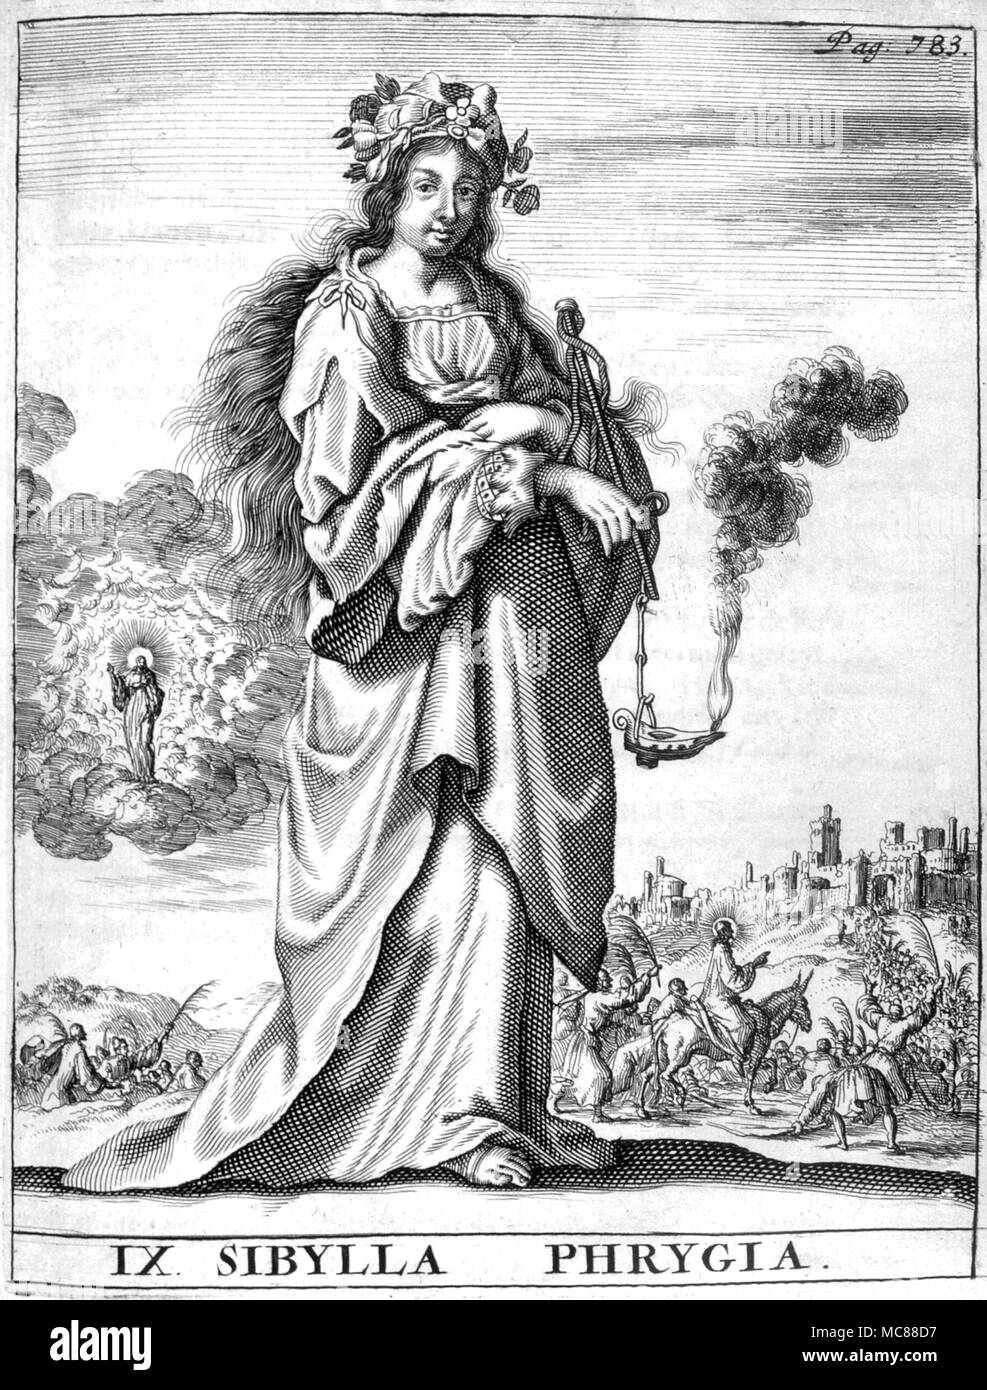 PREDICTIONS AND PROPHECY The Sibyl of Phrygia form the 1685 Amsterdam edition of 'Spiegel der Sibyllen' Stock Photo